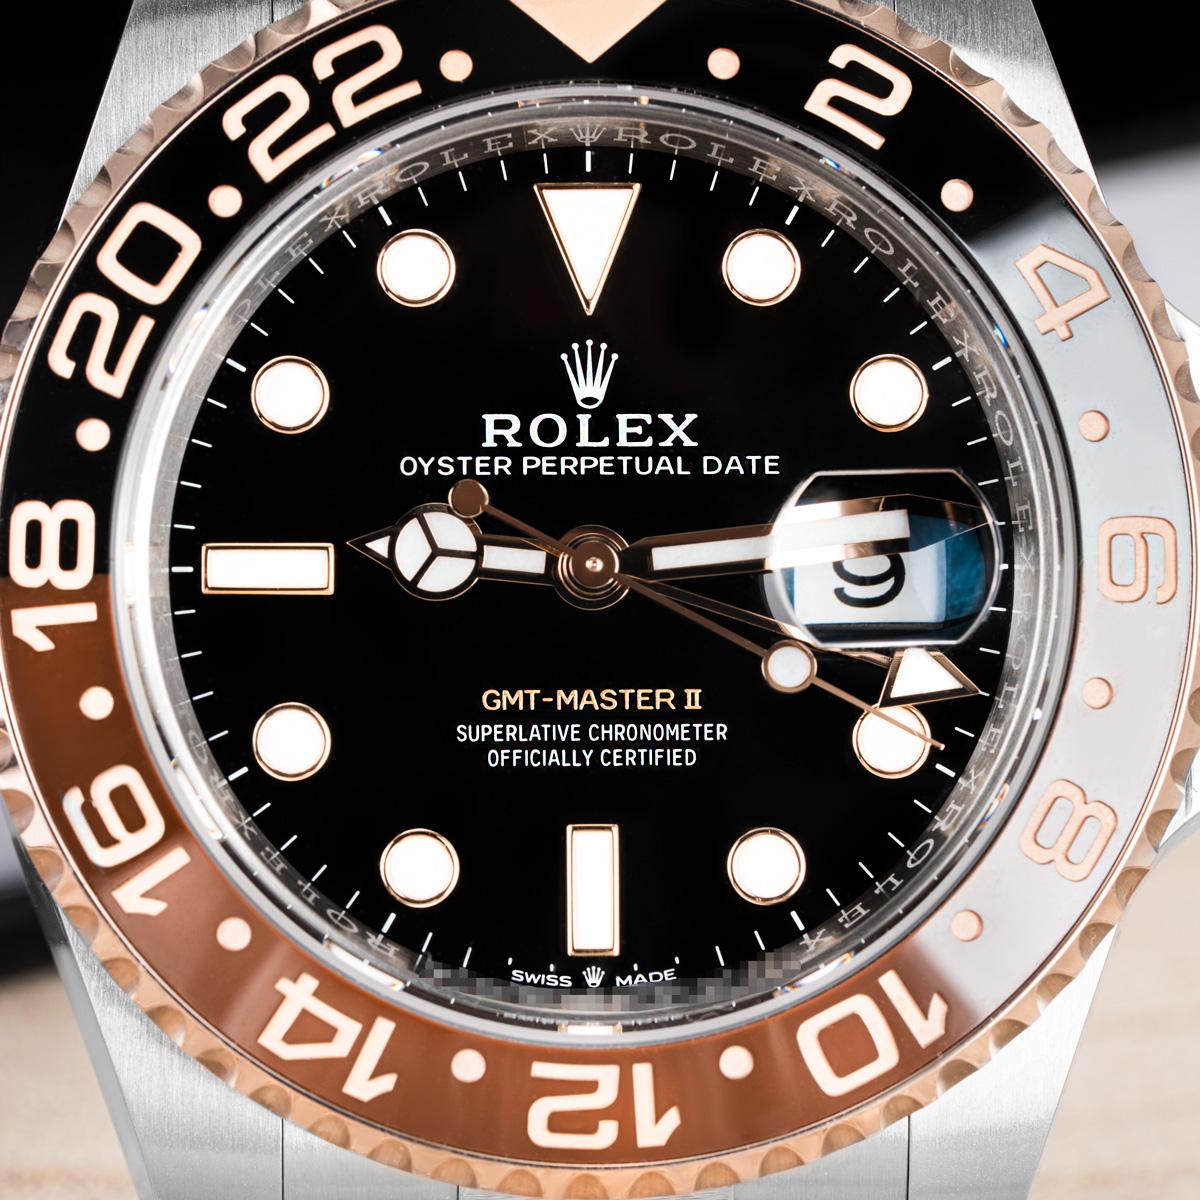 An unworn GMT-Master II Root Beer in Oystersteel and rose gold from Rolex, featuring a black dial with the date and second time zone hand. The two colour black and brown ceramic bidirectional rotatable bezel features a 24 hour display.

The Oyster